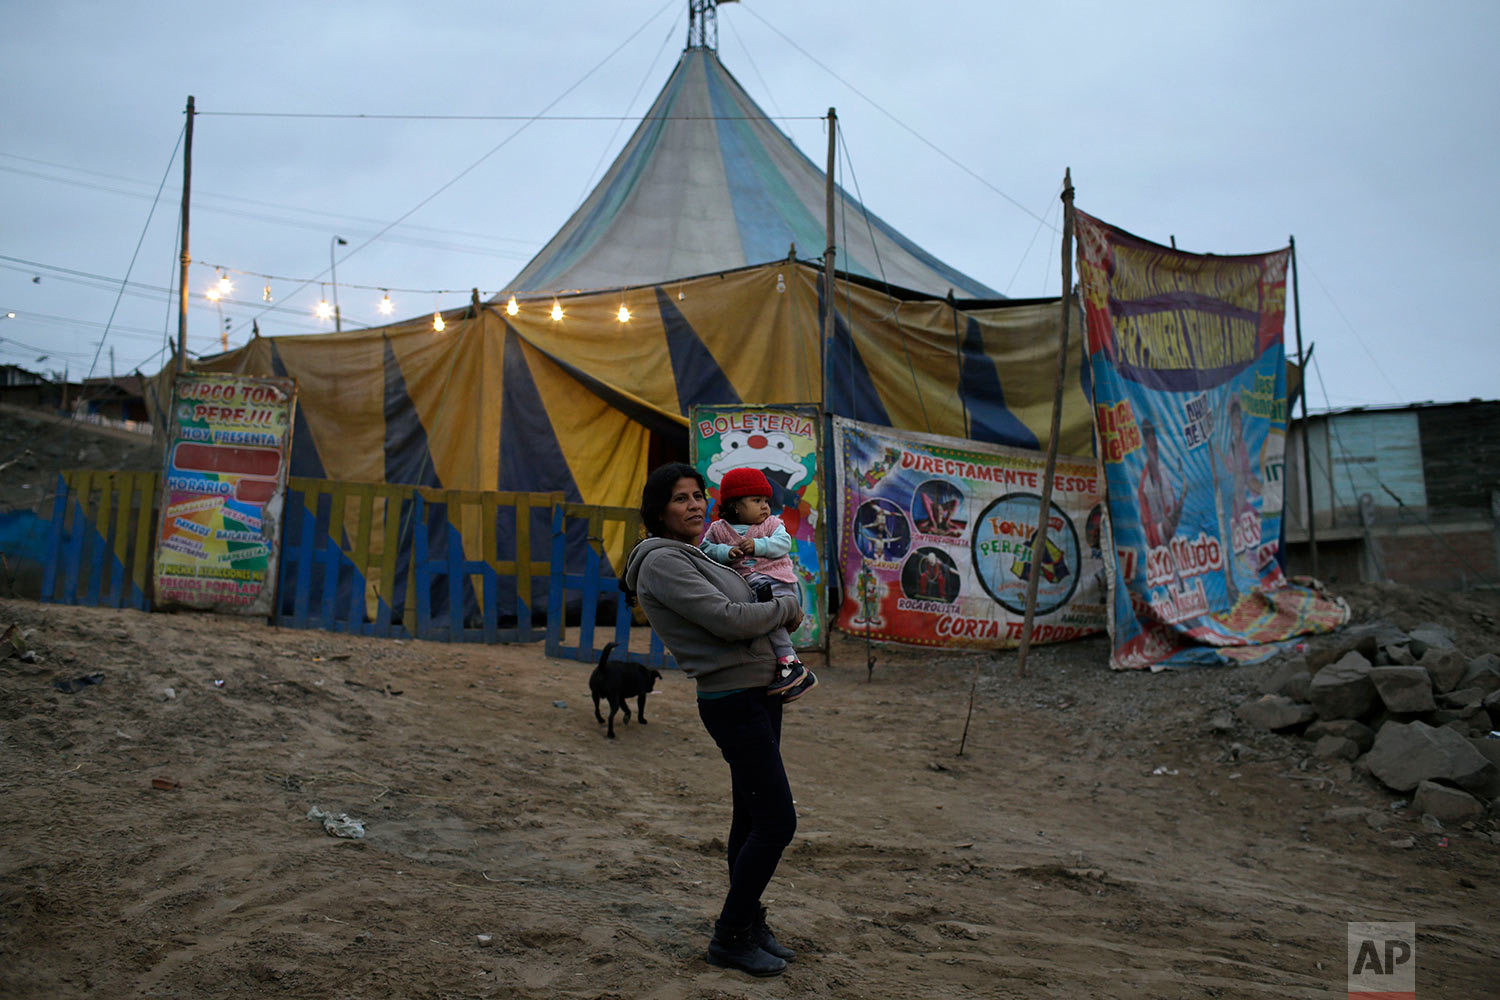  A woman with her baby waits for one of her daughters to arrive before entering the Tony Perejil circus tent, set up in the shantytown of Puente Piedra on the outskirts of Lima, Peru, July 8, 2018. Tickets cost 6 Soles (2 dollars) for adults, and are